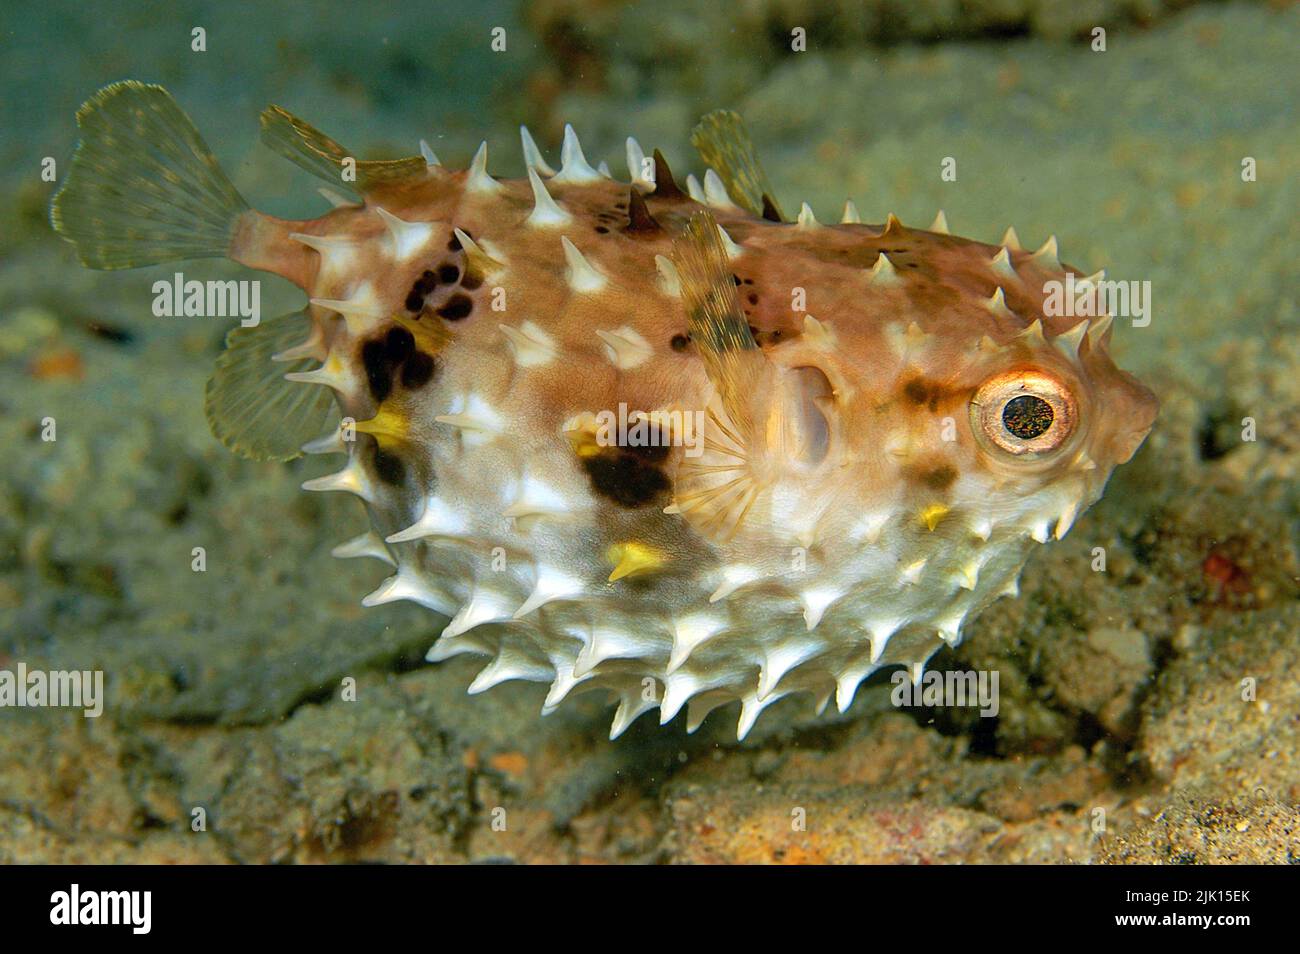 Rounded Birdbeak burrfish (Cyclichthys orbicularis), when in danger, it swallows water and pumps itself up into a ball, Sulawesi, Indonesia Stock Photo